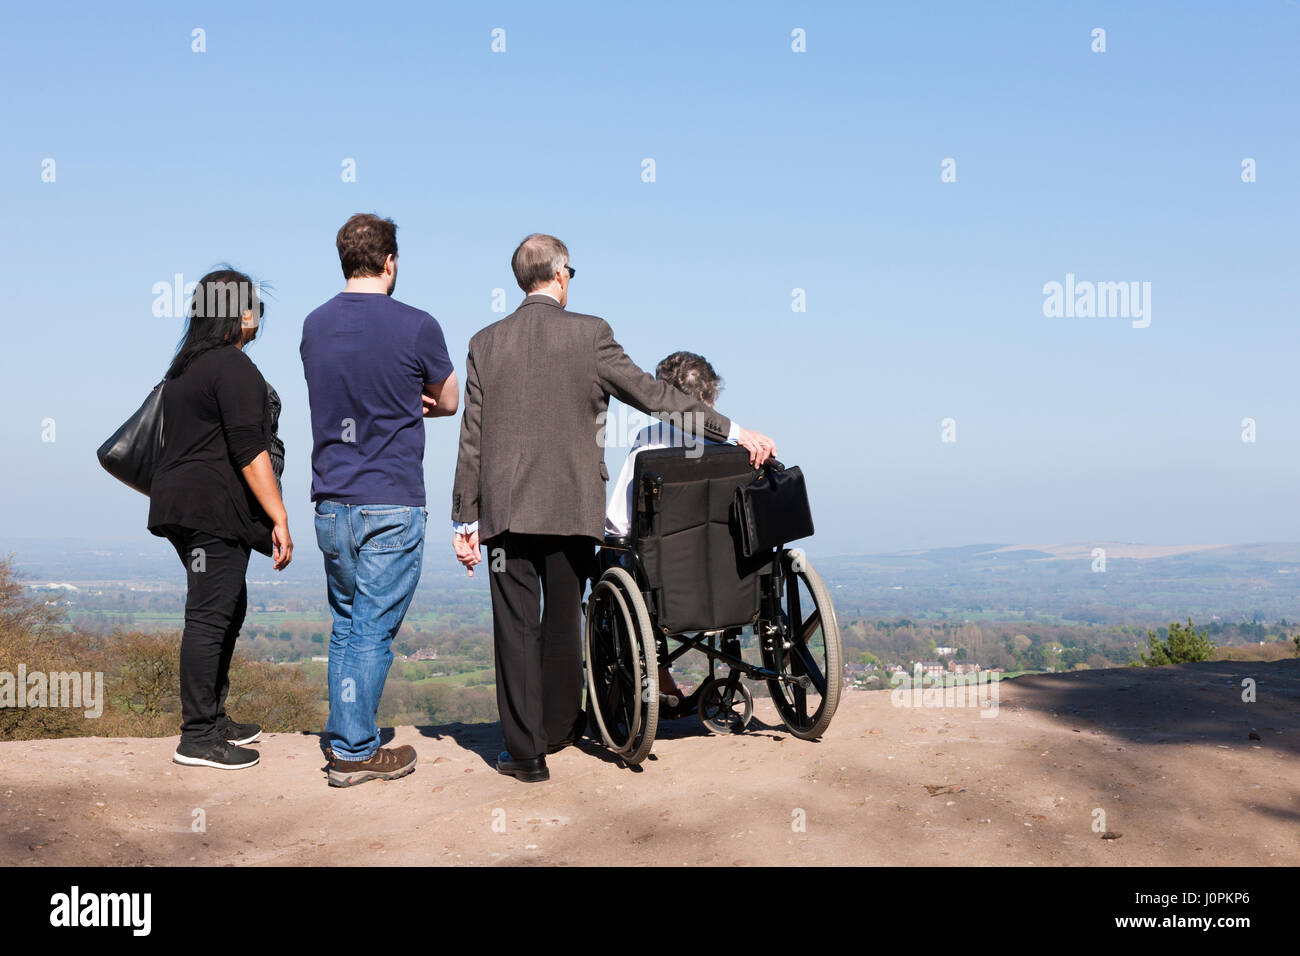 Family sightseeing with one person in a wheelchair enjoy the view / scene / scenery over Cheshire Plain / Plains during day out at Alderley Edge, UK. Stock Photo